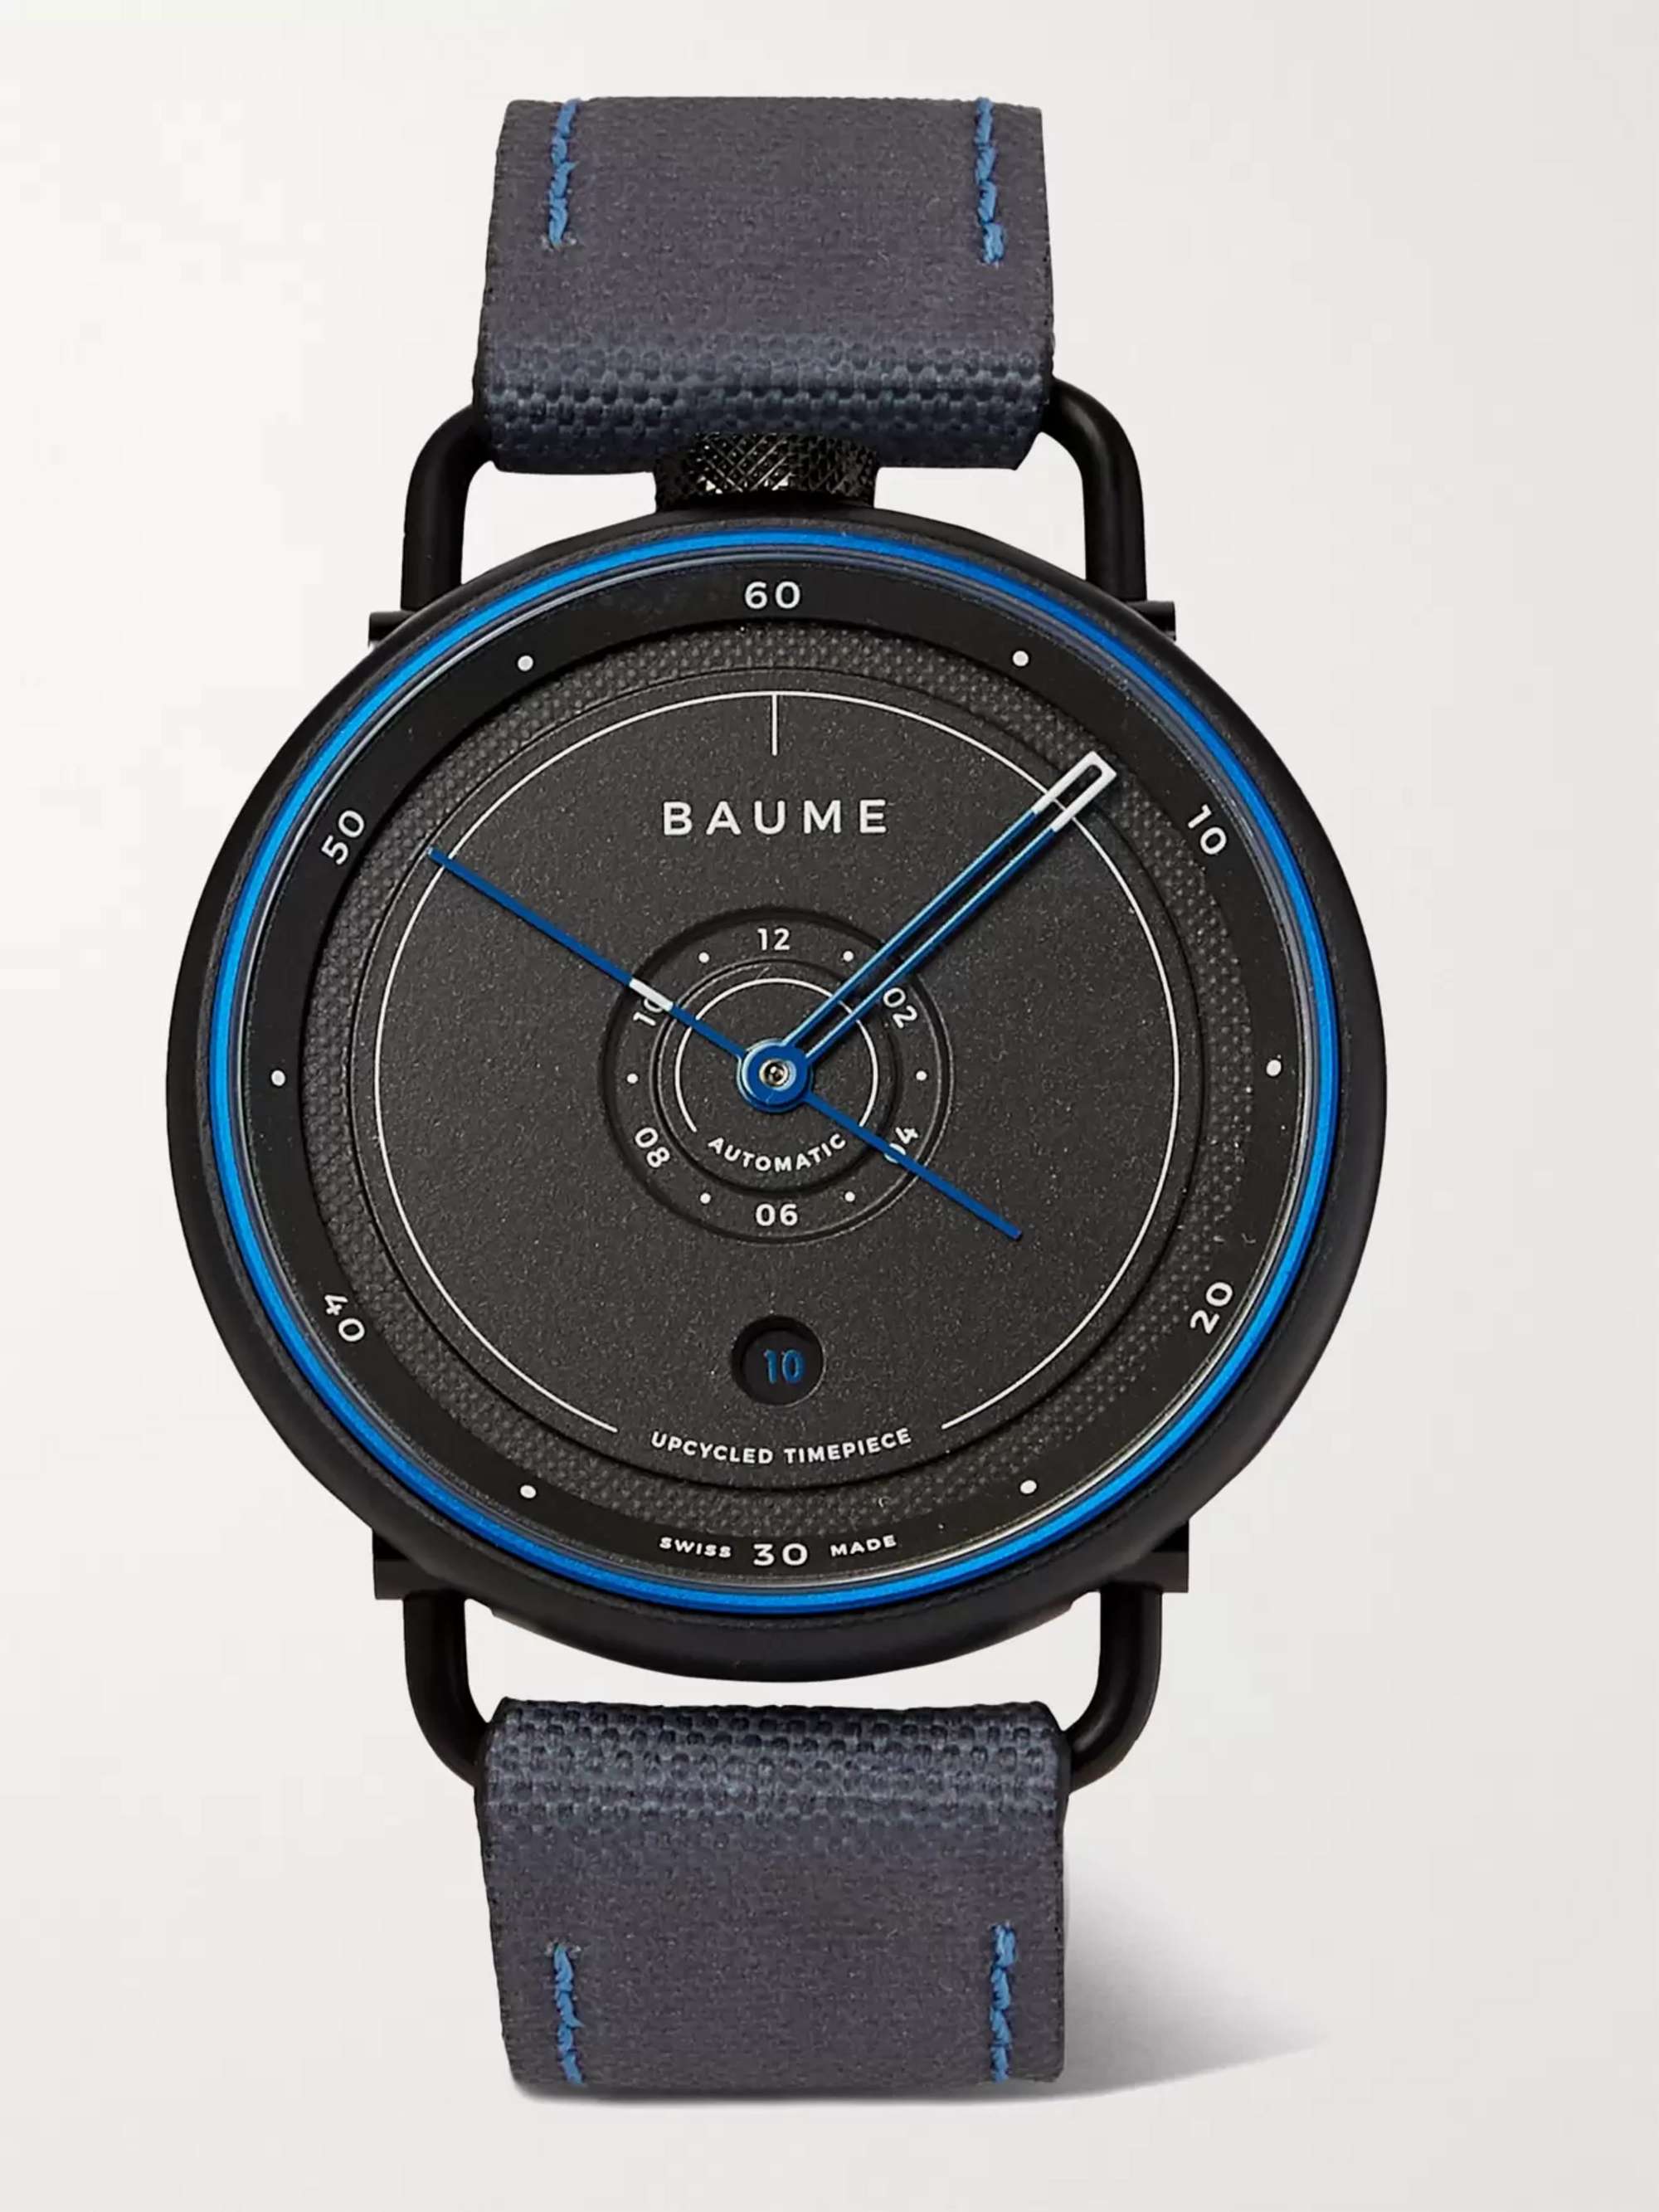 BAUME Ocean Limited Edition Automatic 42mm Plastic, Aluminium and SEAQUAL Canvas Watch, Ref. No. 10587